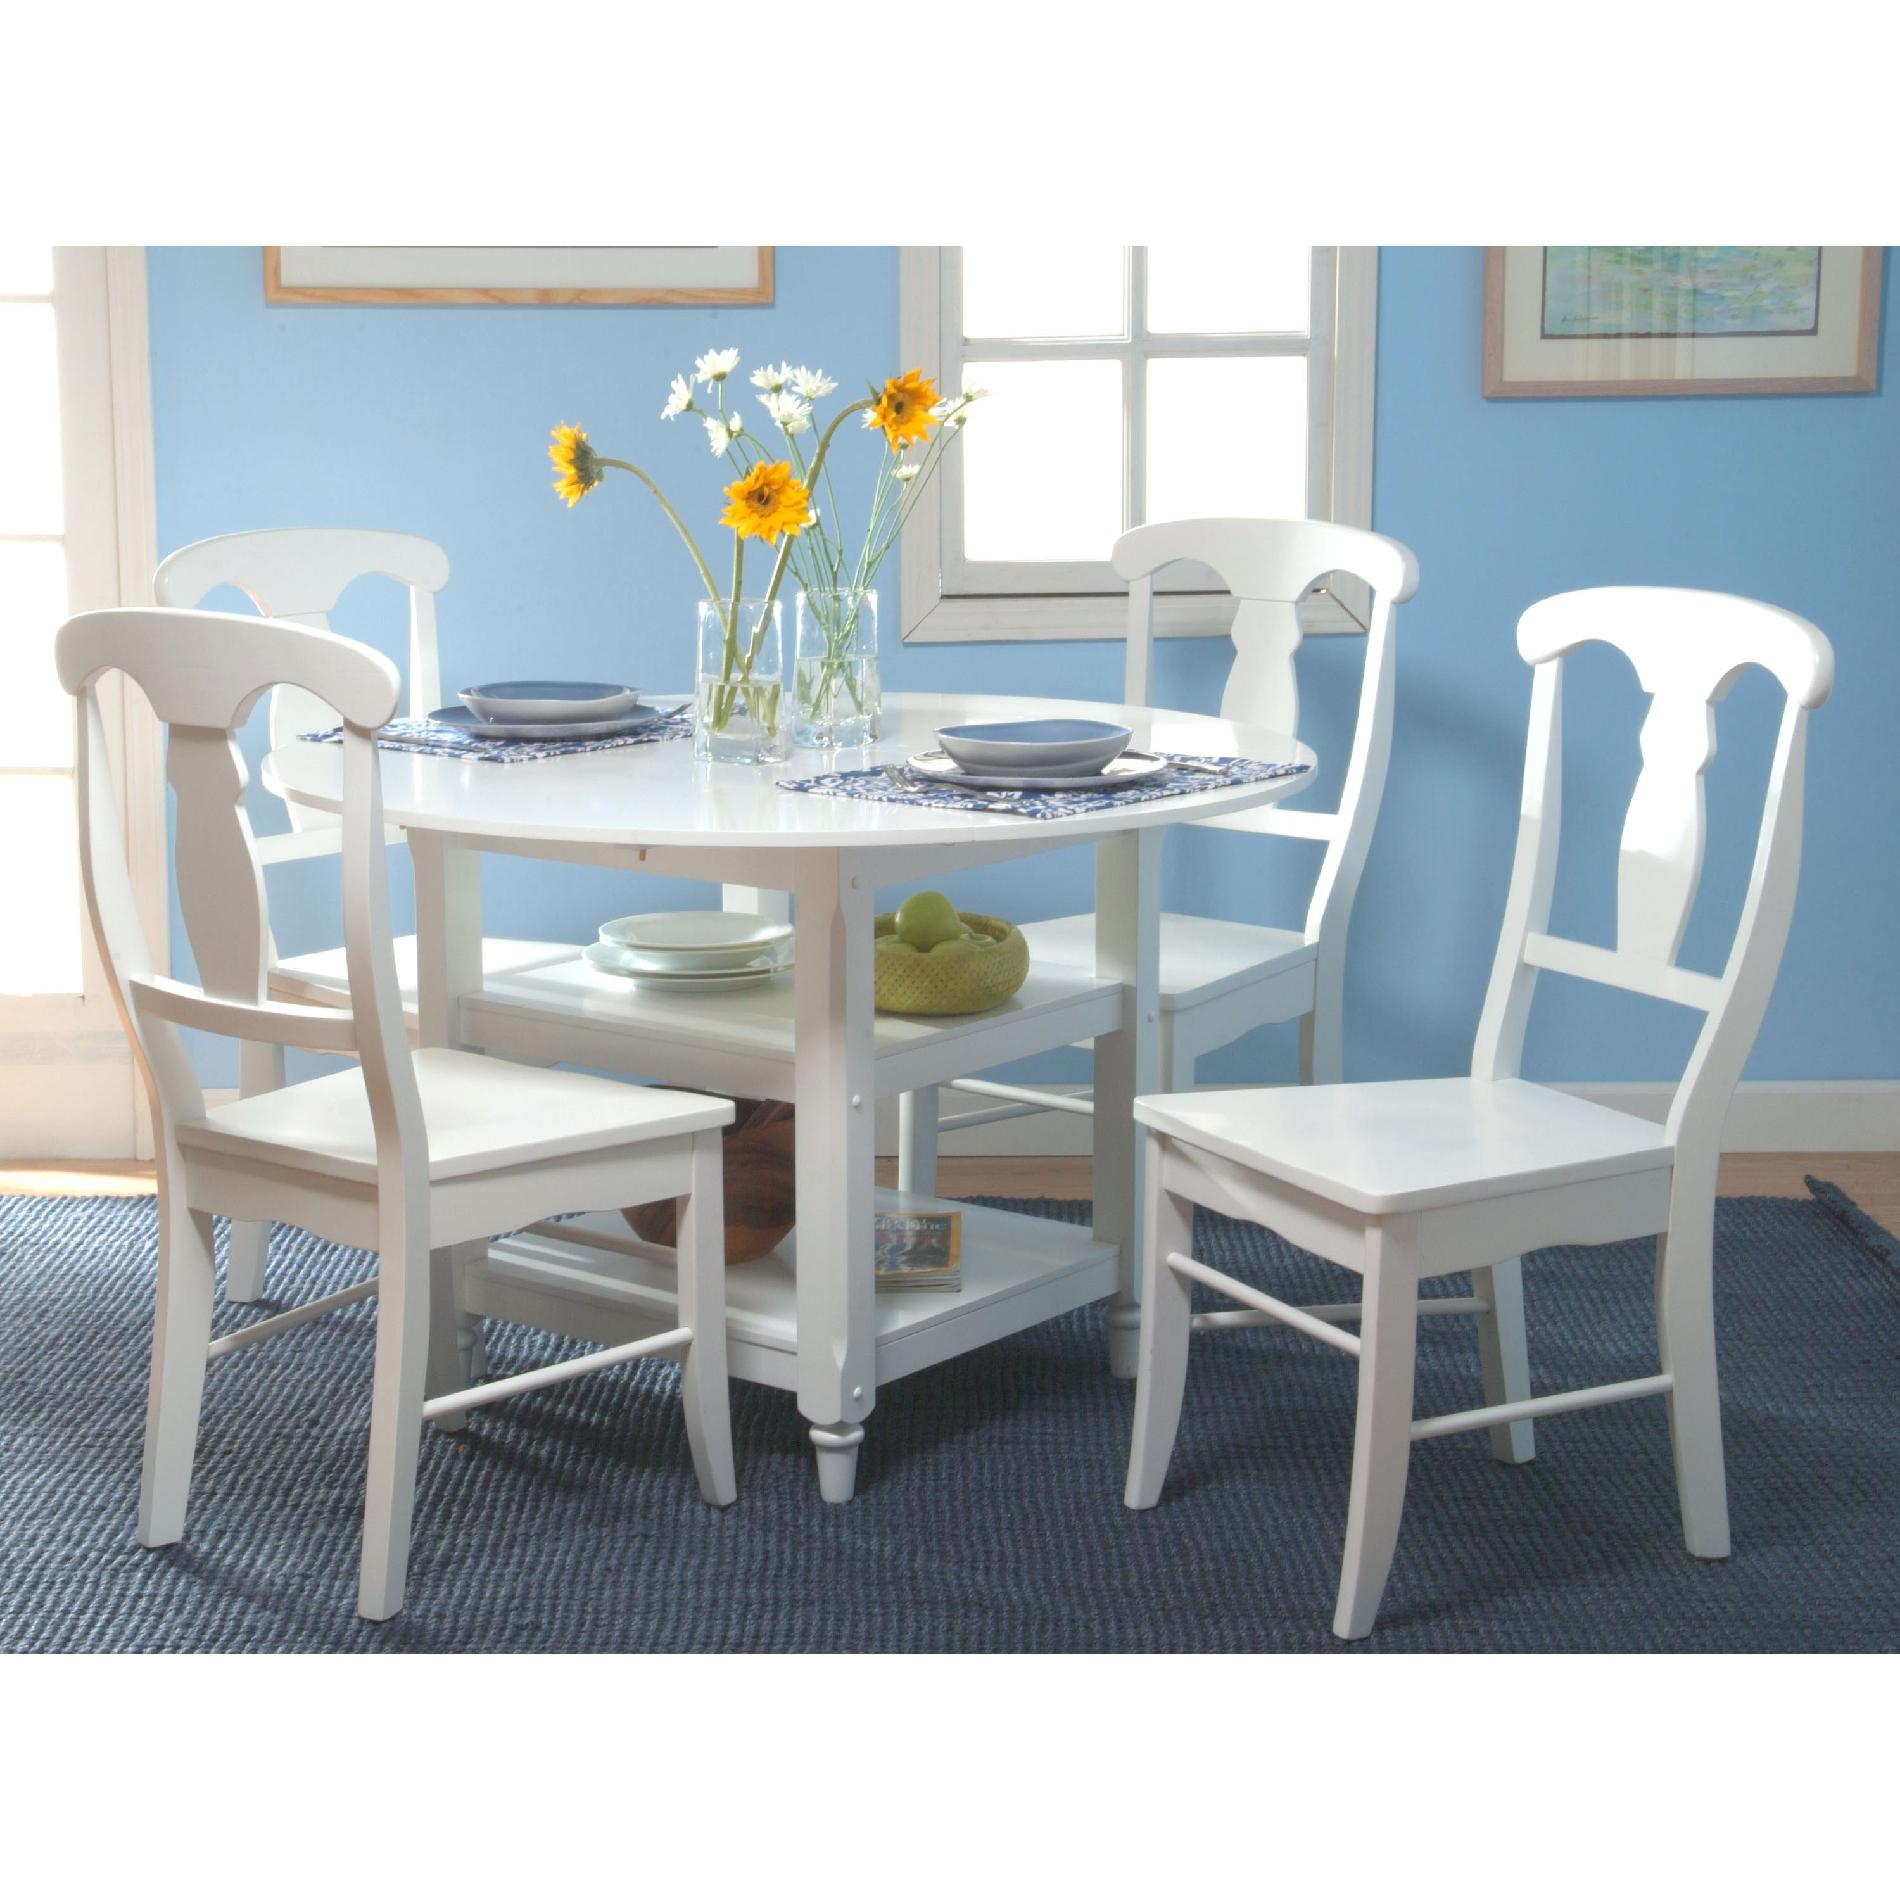 5 pc. Cottage Dining Set in White Finish